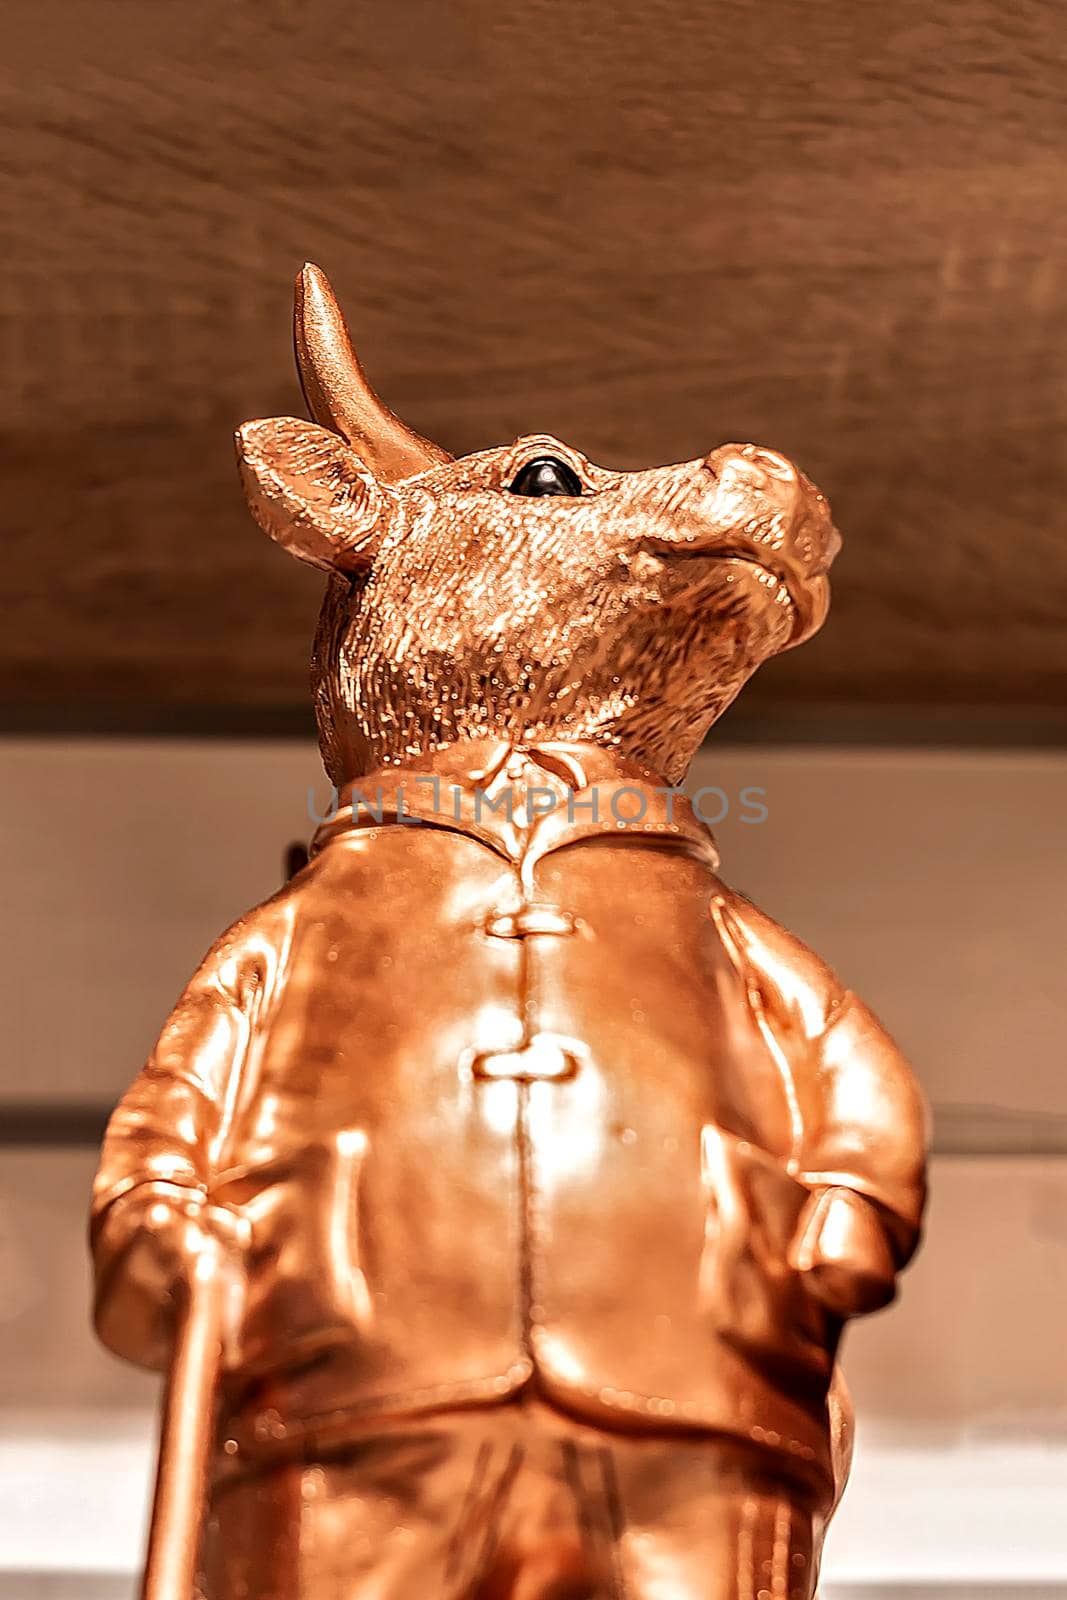 Copper bull figurine. View from the bottom up. 2021 symbol new year. Surgut, Russia - December 10, 2020. by Essffes